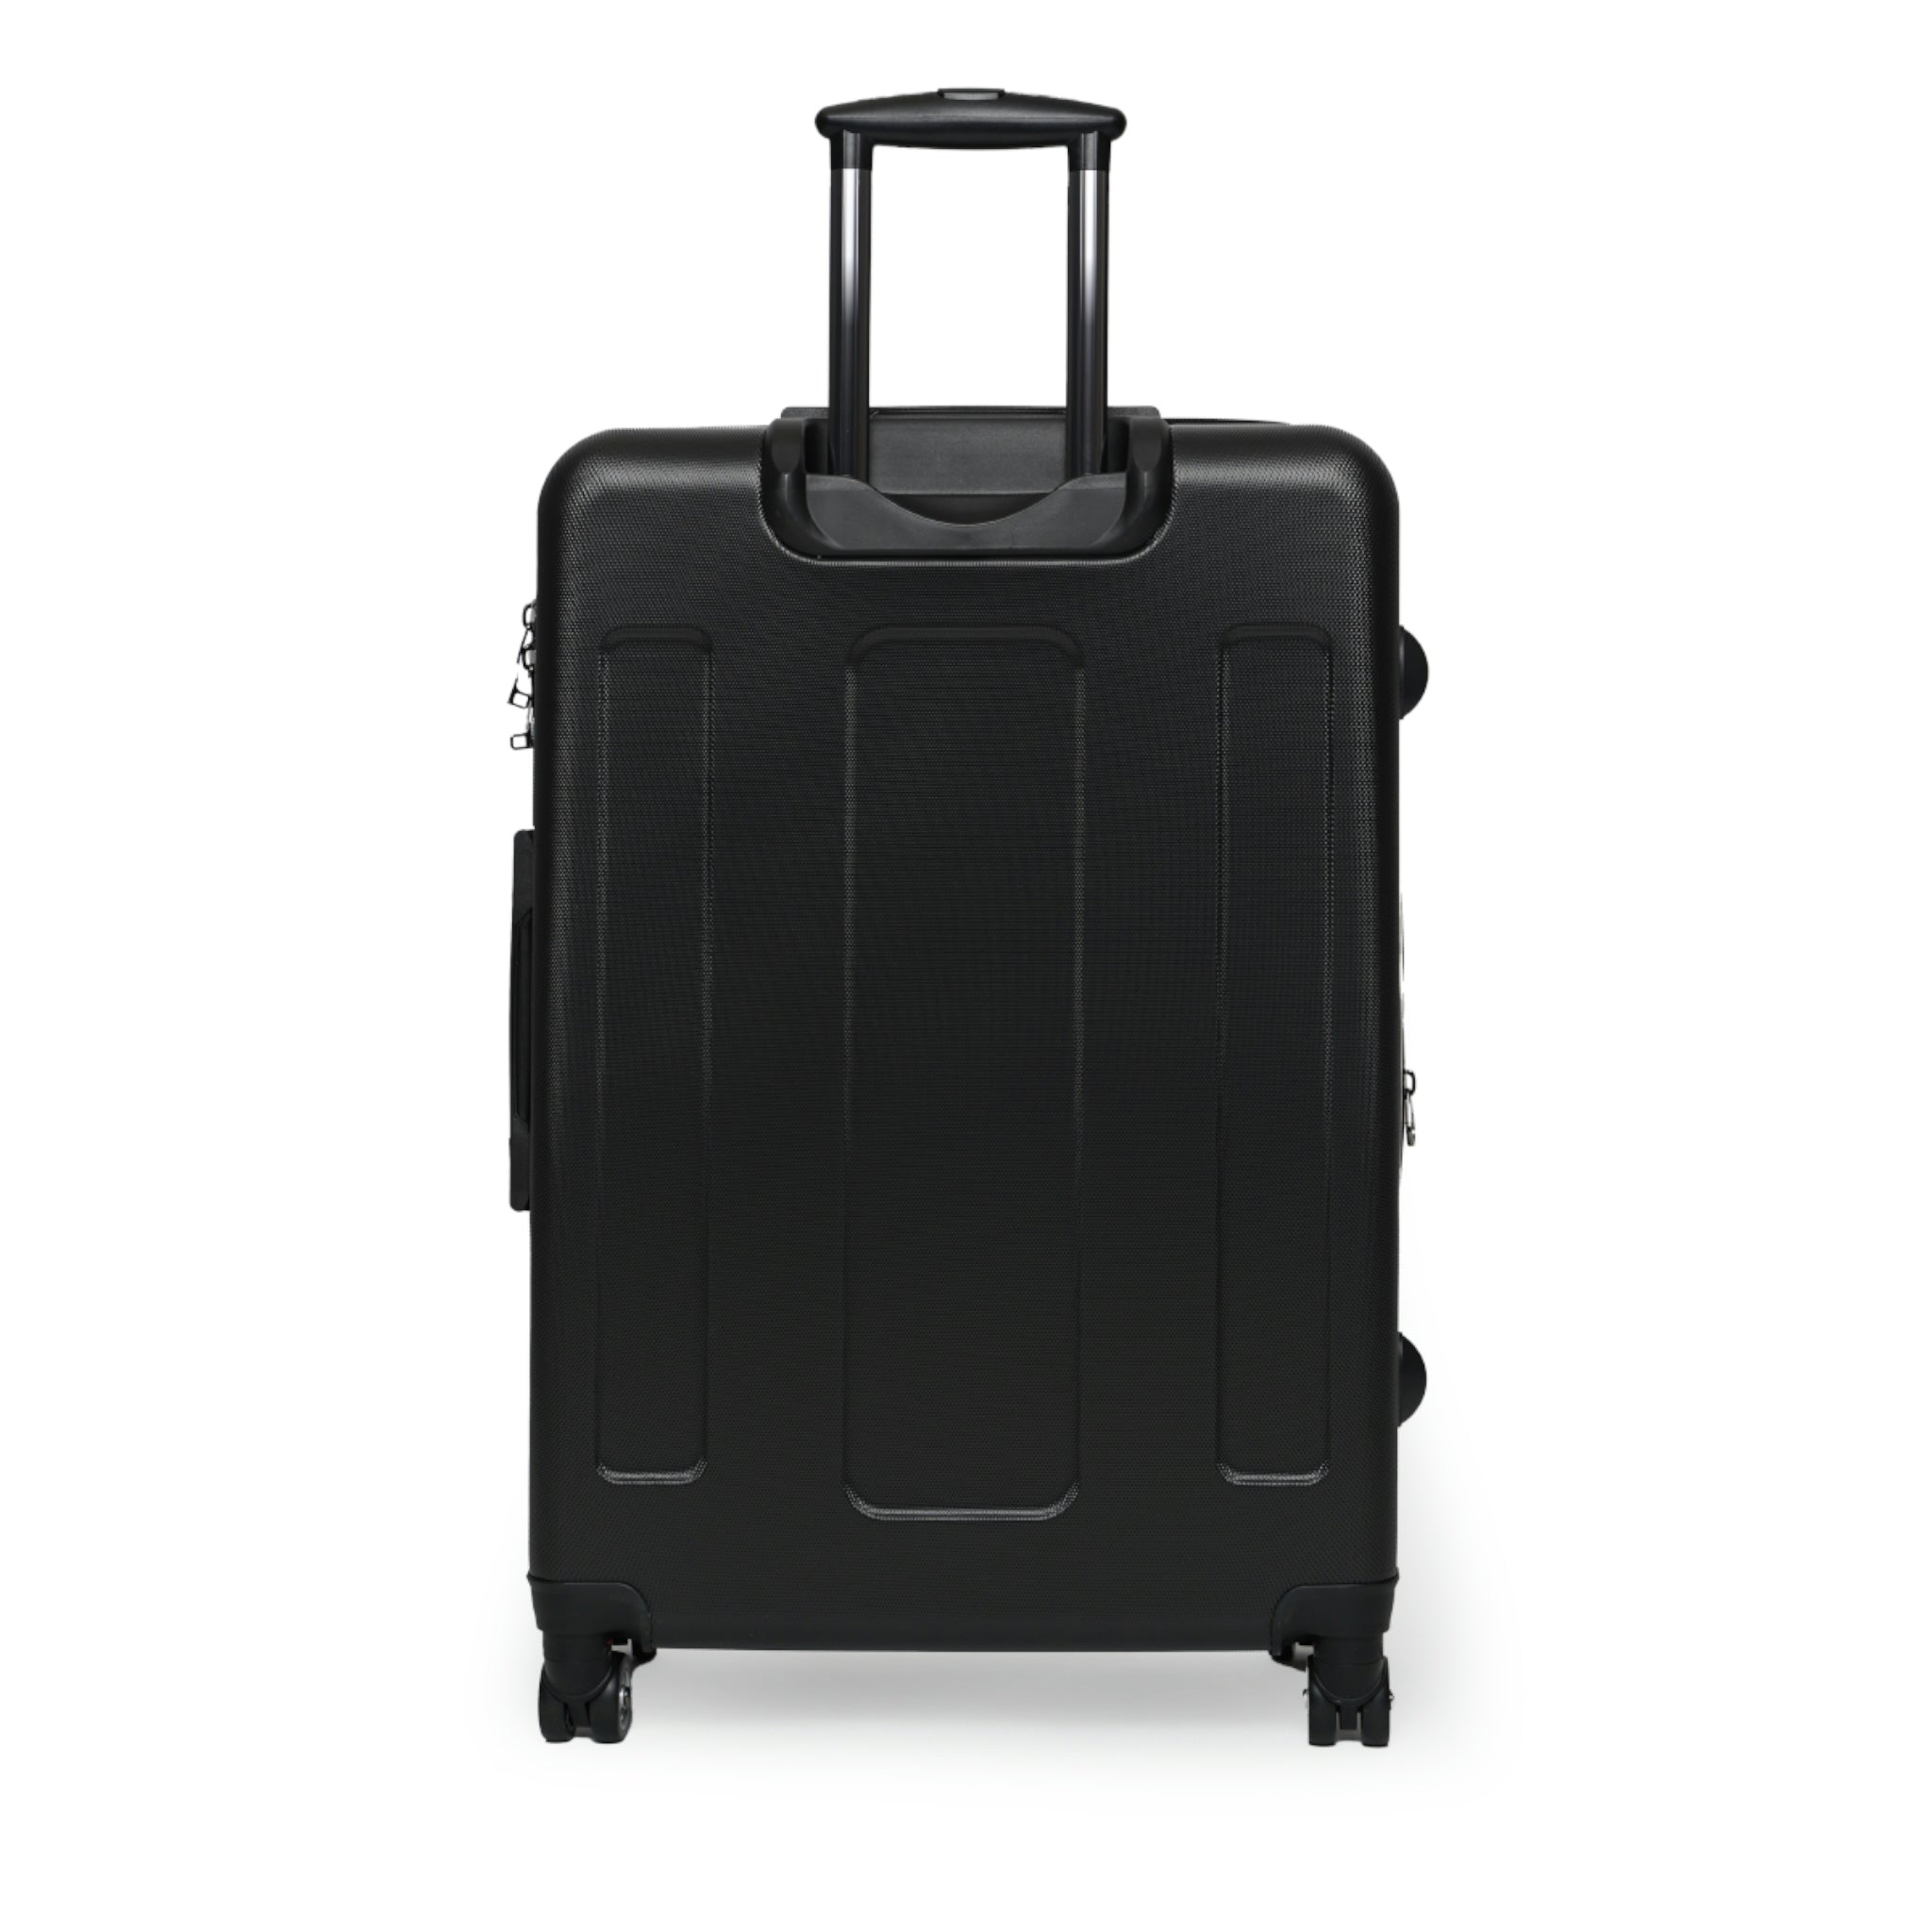 Nipin Blossom Sky Suitcases